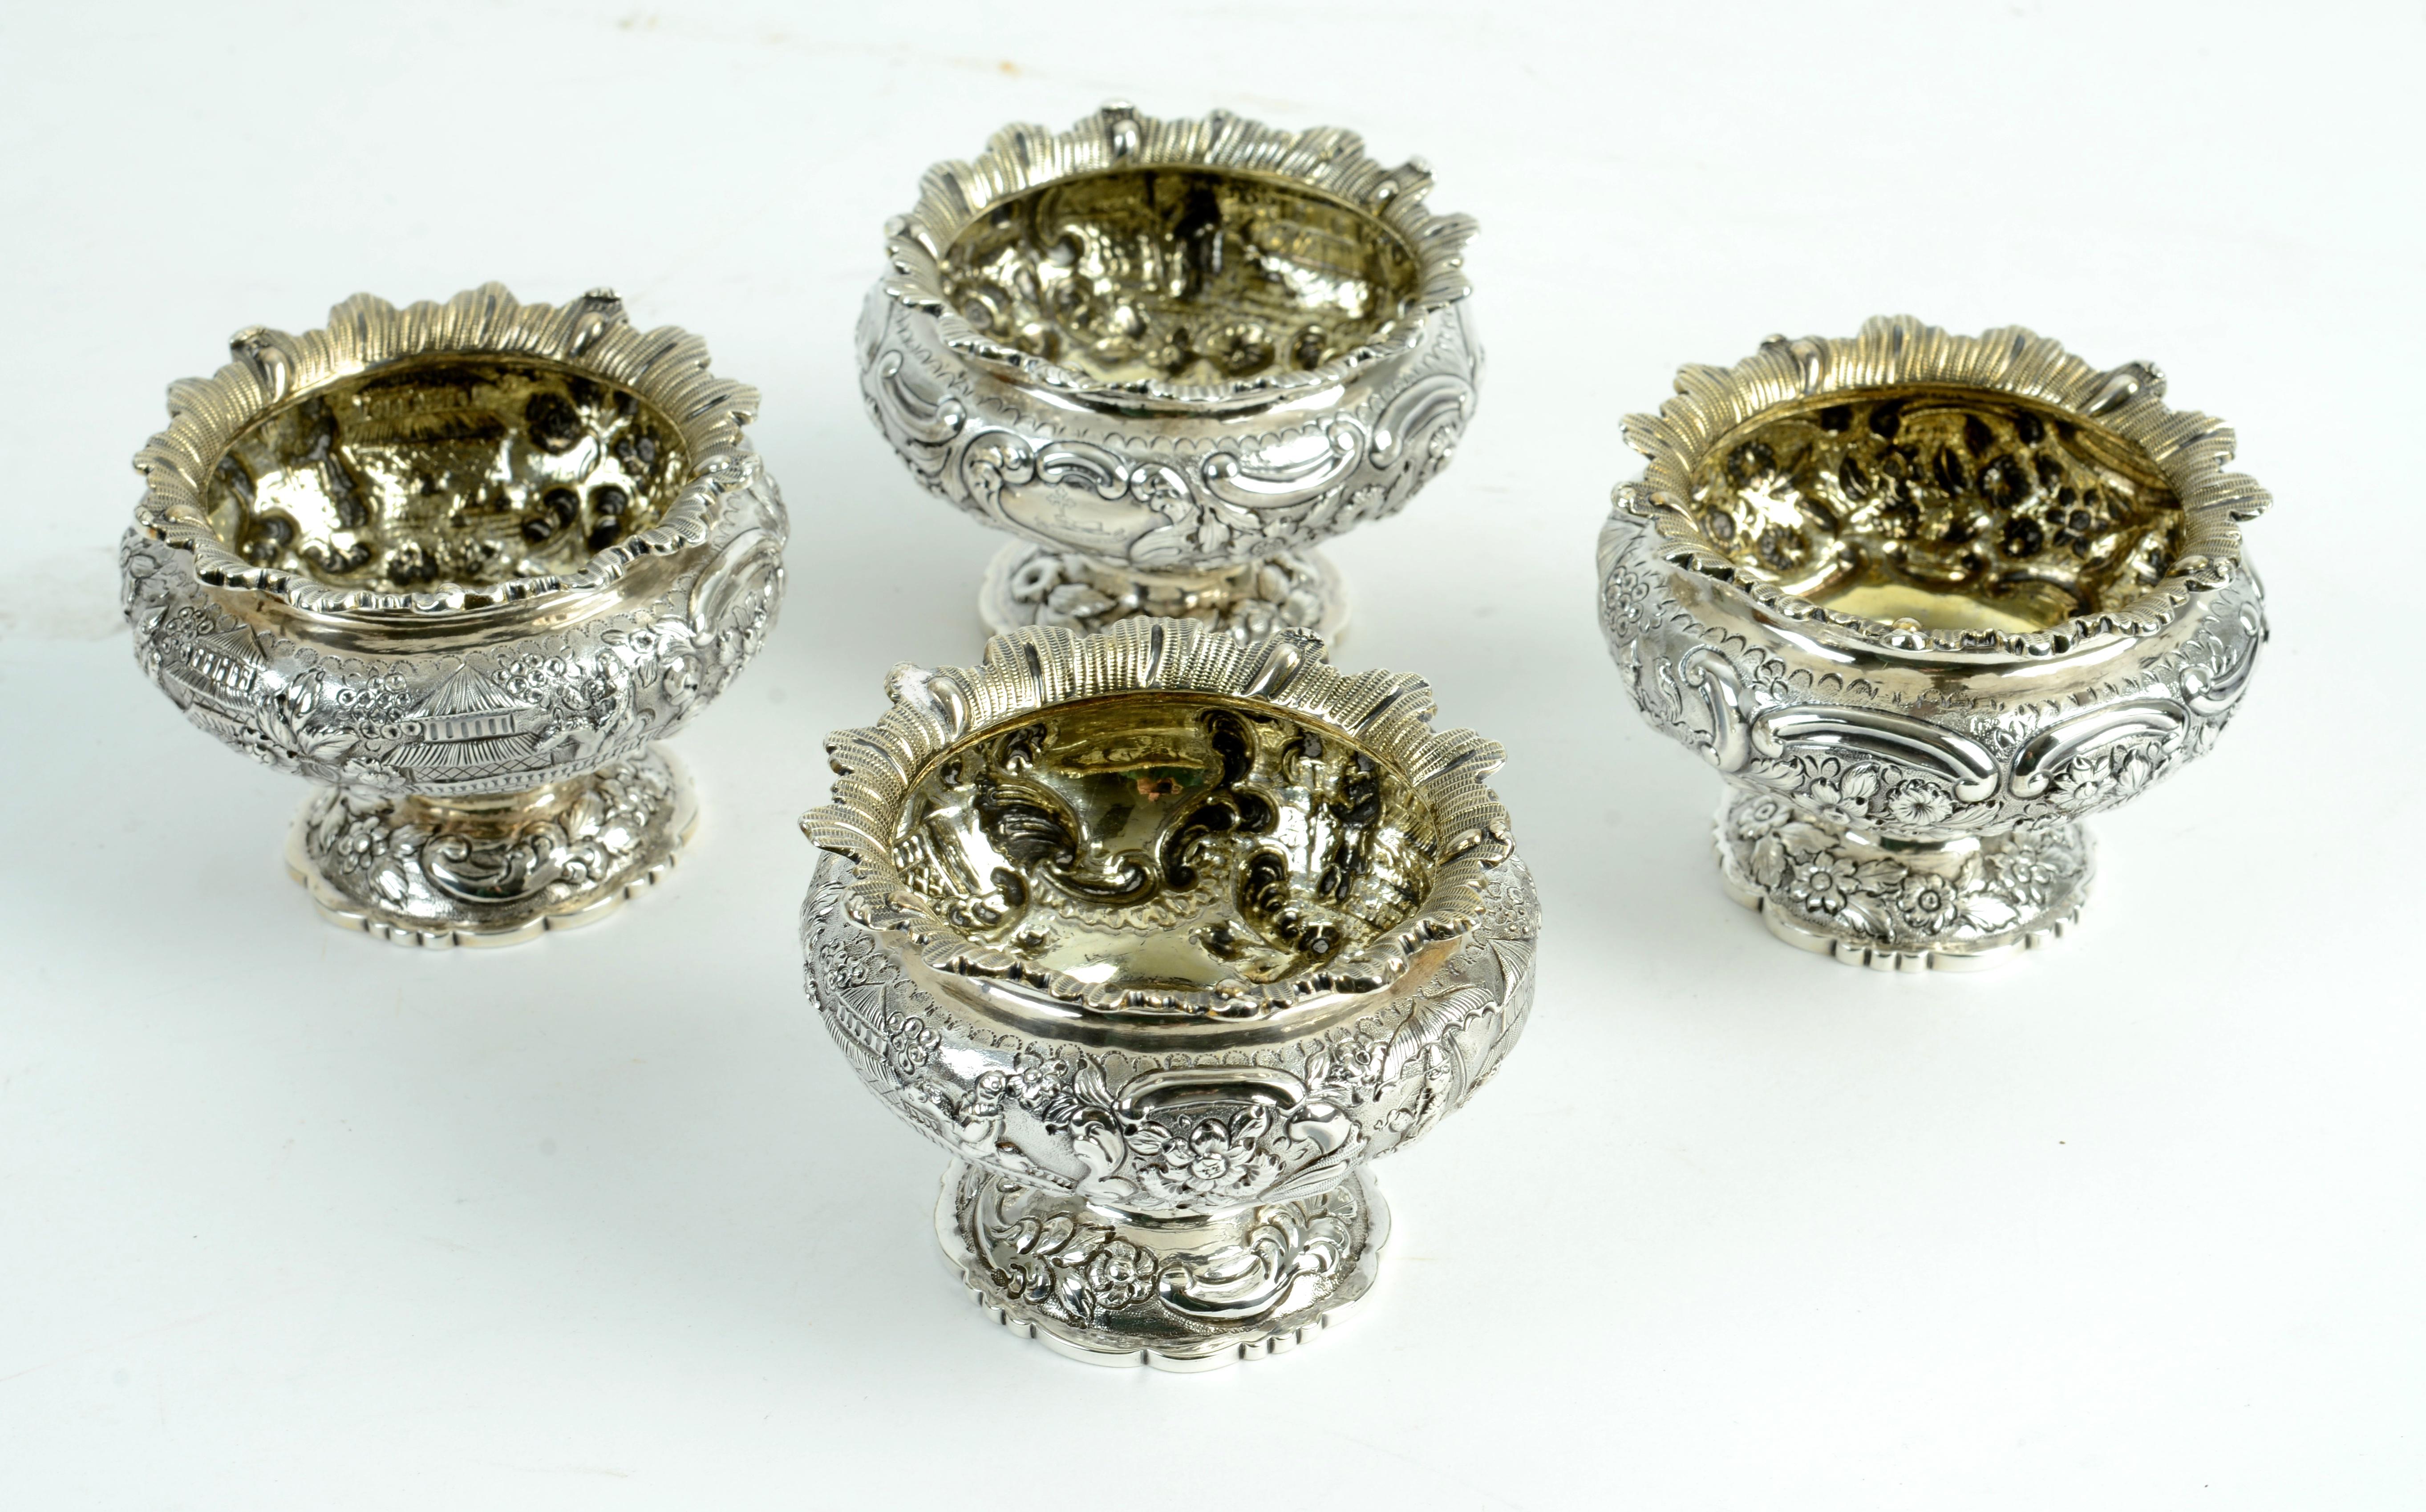 English Set of 4 Georgian Chinoiserie Decorated Master Salts by John Edward Terrey & Co. For Sale